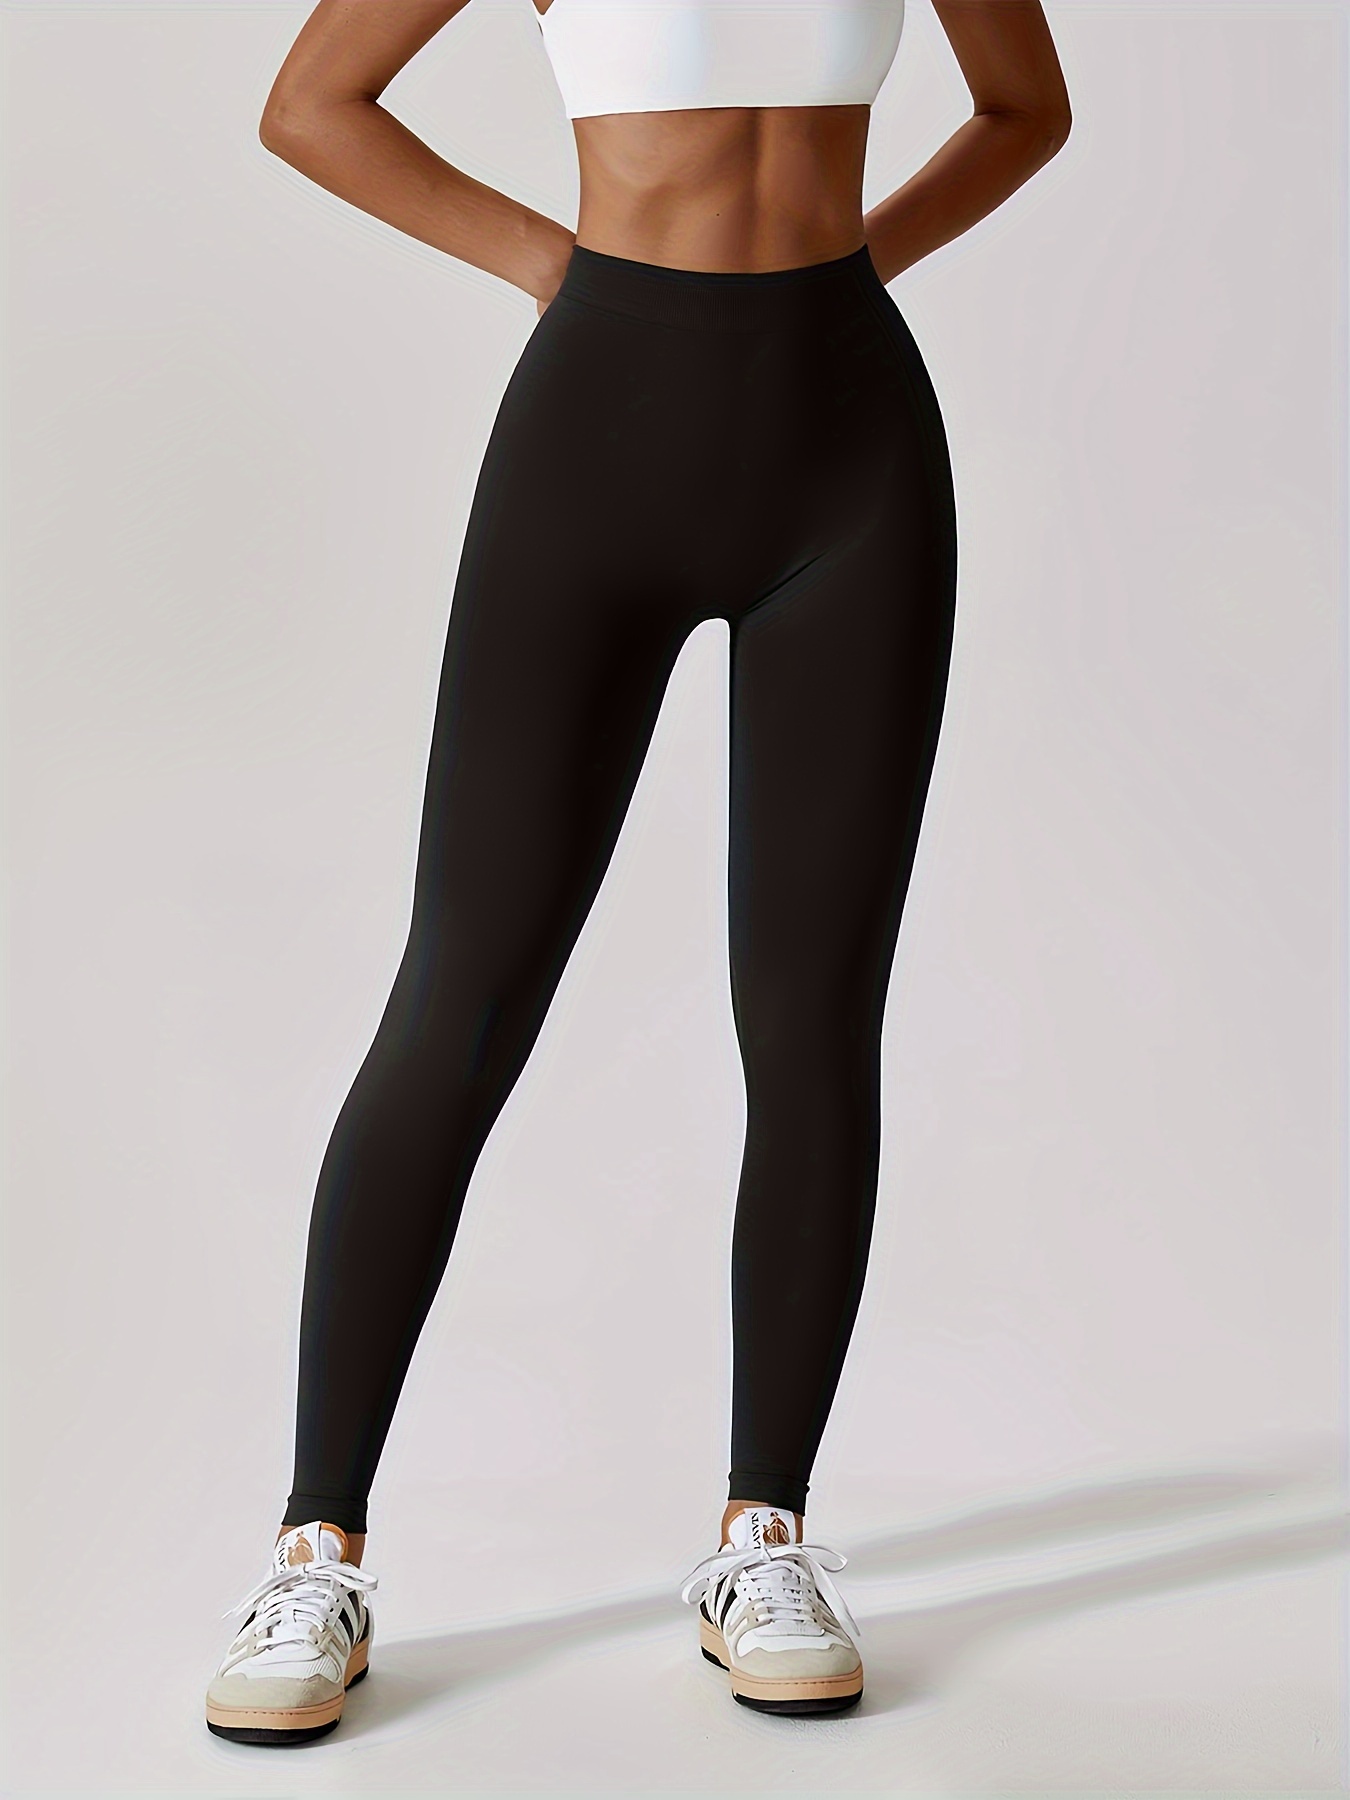 Women Solid Color High Waist Pants Stretchy Yoga Sport Bottoms Compression  Pants